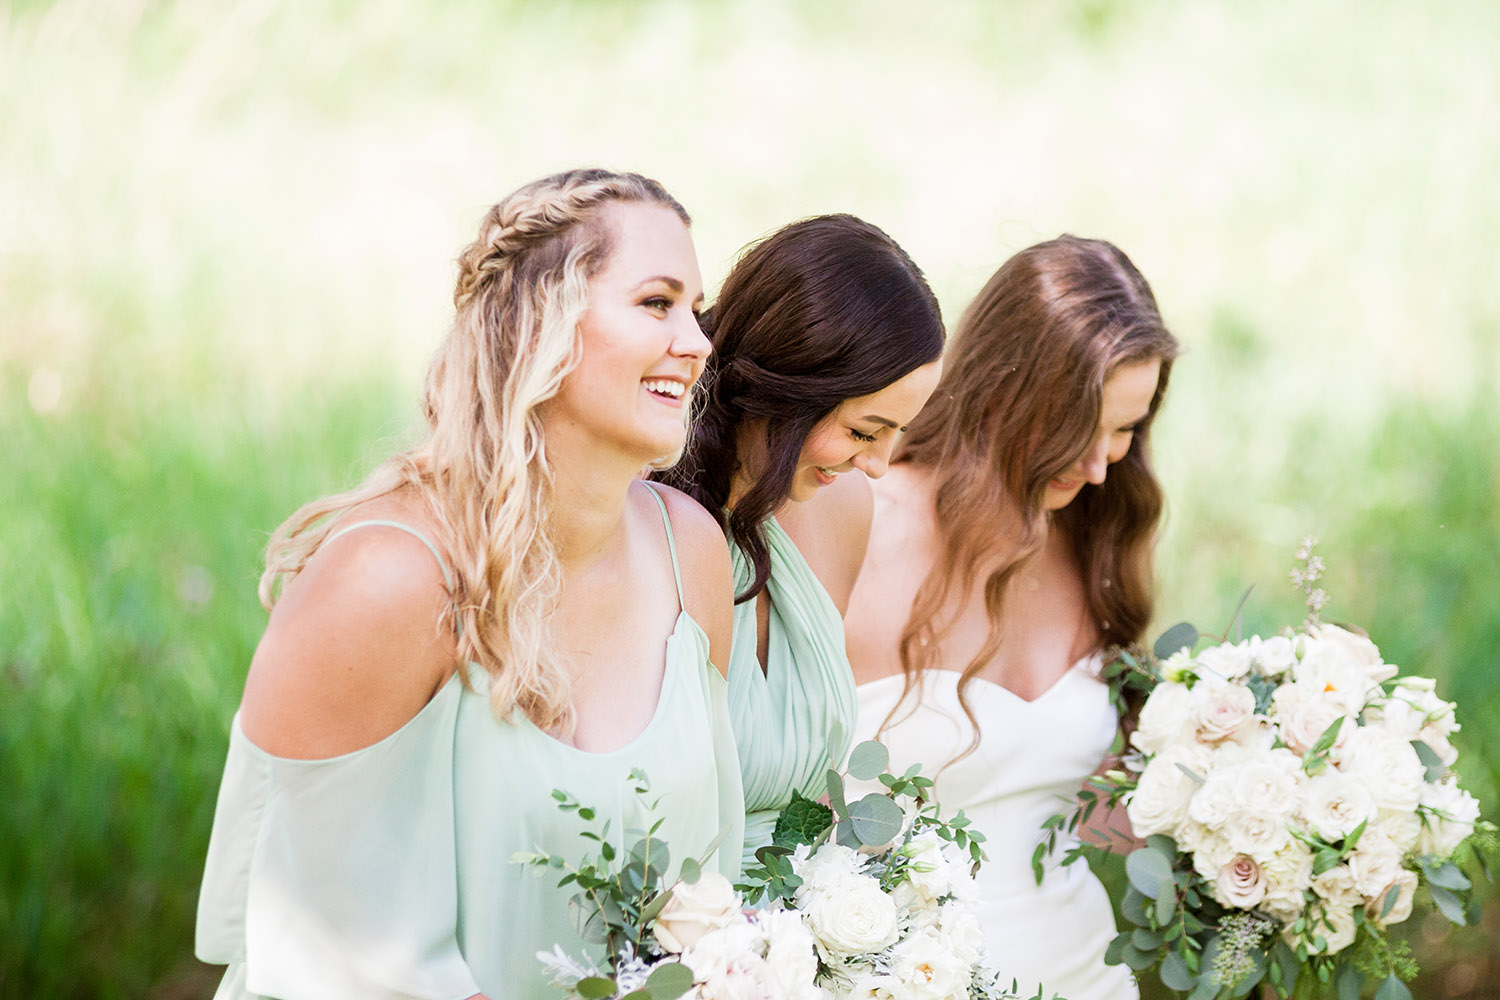 bride with bridesmaids in pale green dresses